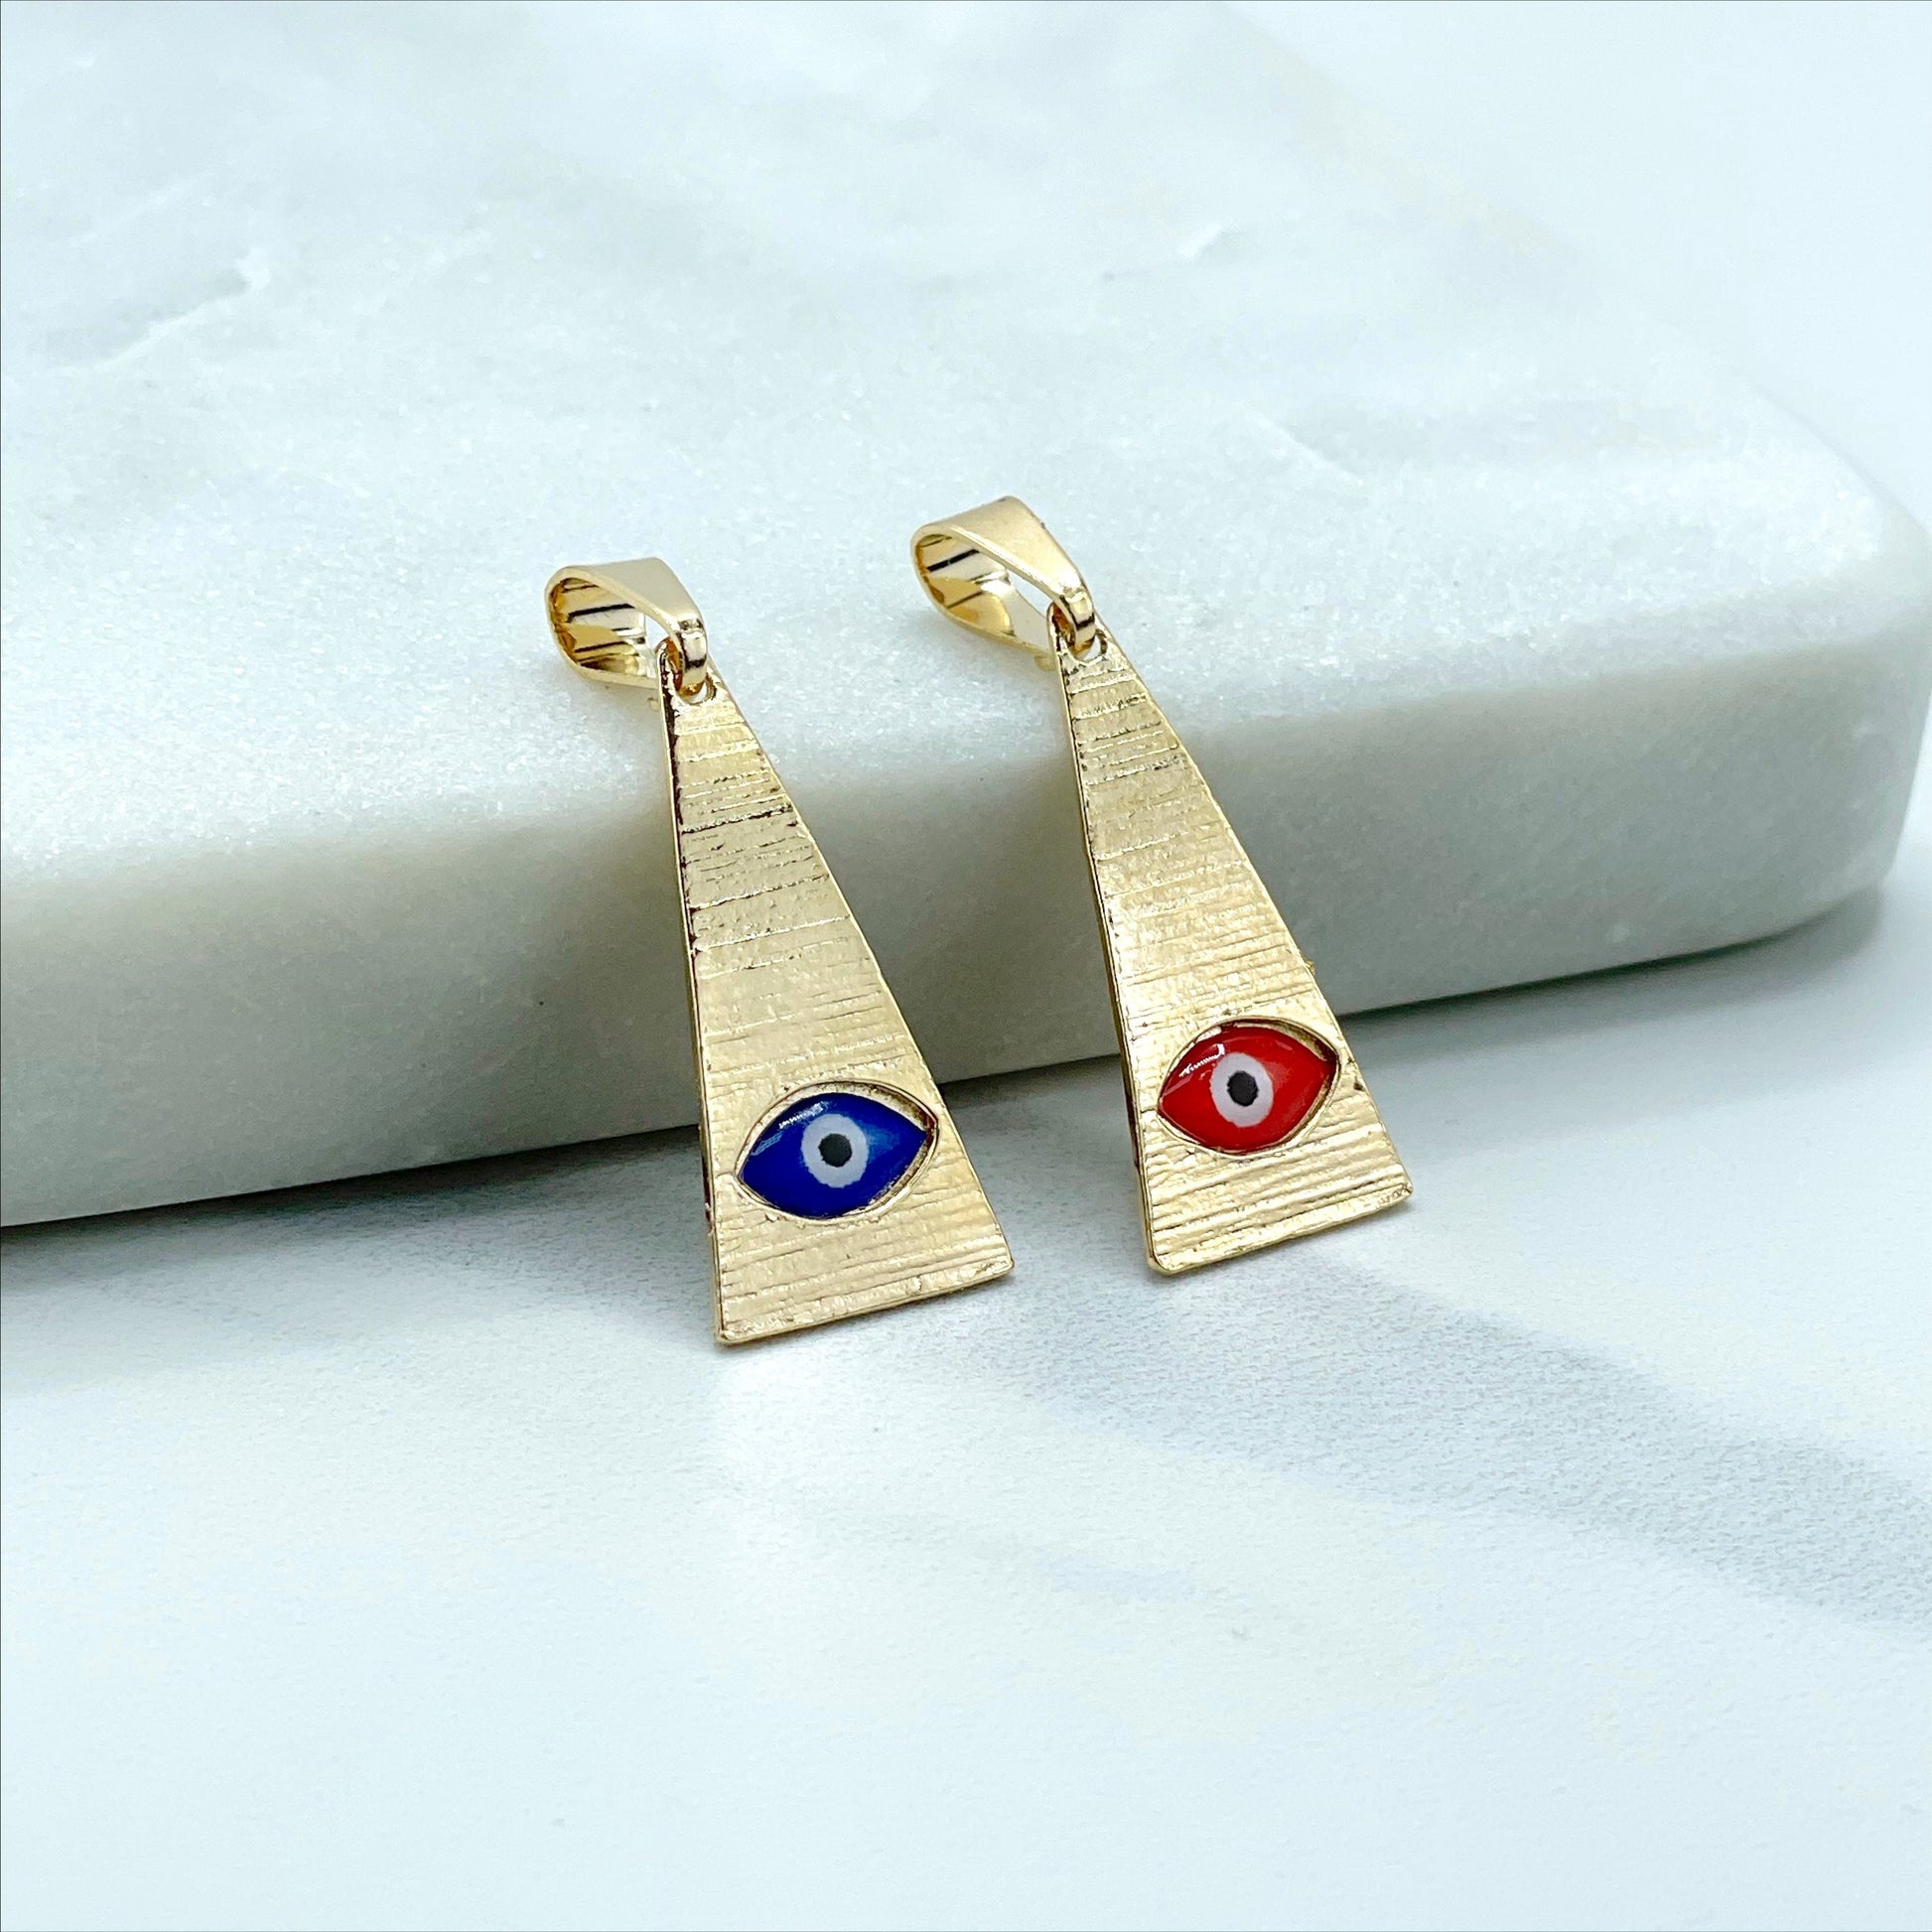 18k Gold Filled Pyramid Triangle Shape with Enamel Red or Blue Evil Eye Charms Pendant, Lucky Protection, Wholesale Jewelry Making Supplies